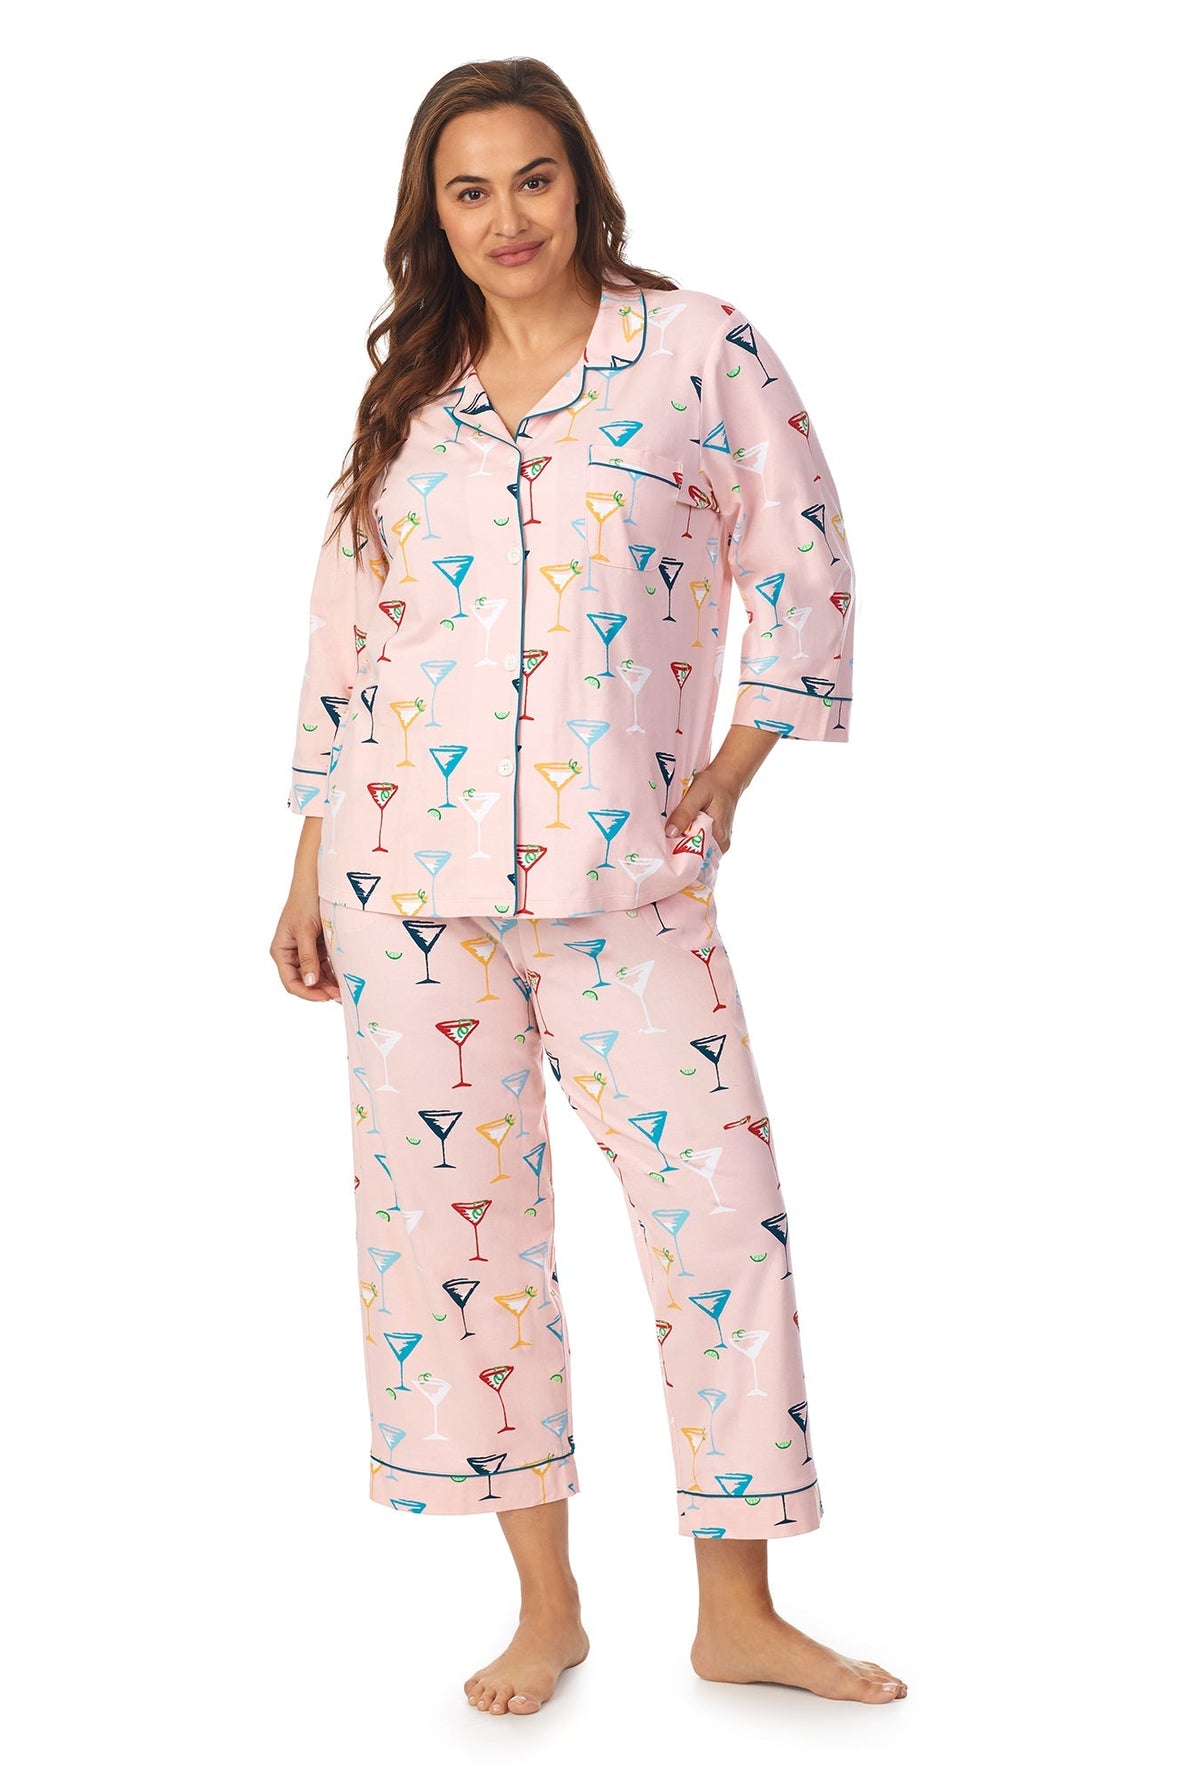 A lady wearing a pink quarter sleeve cropped plus size pj set with glass pattern.